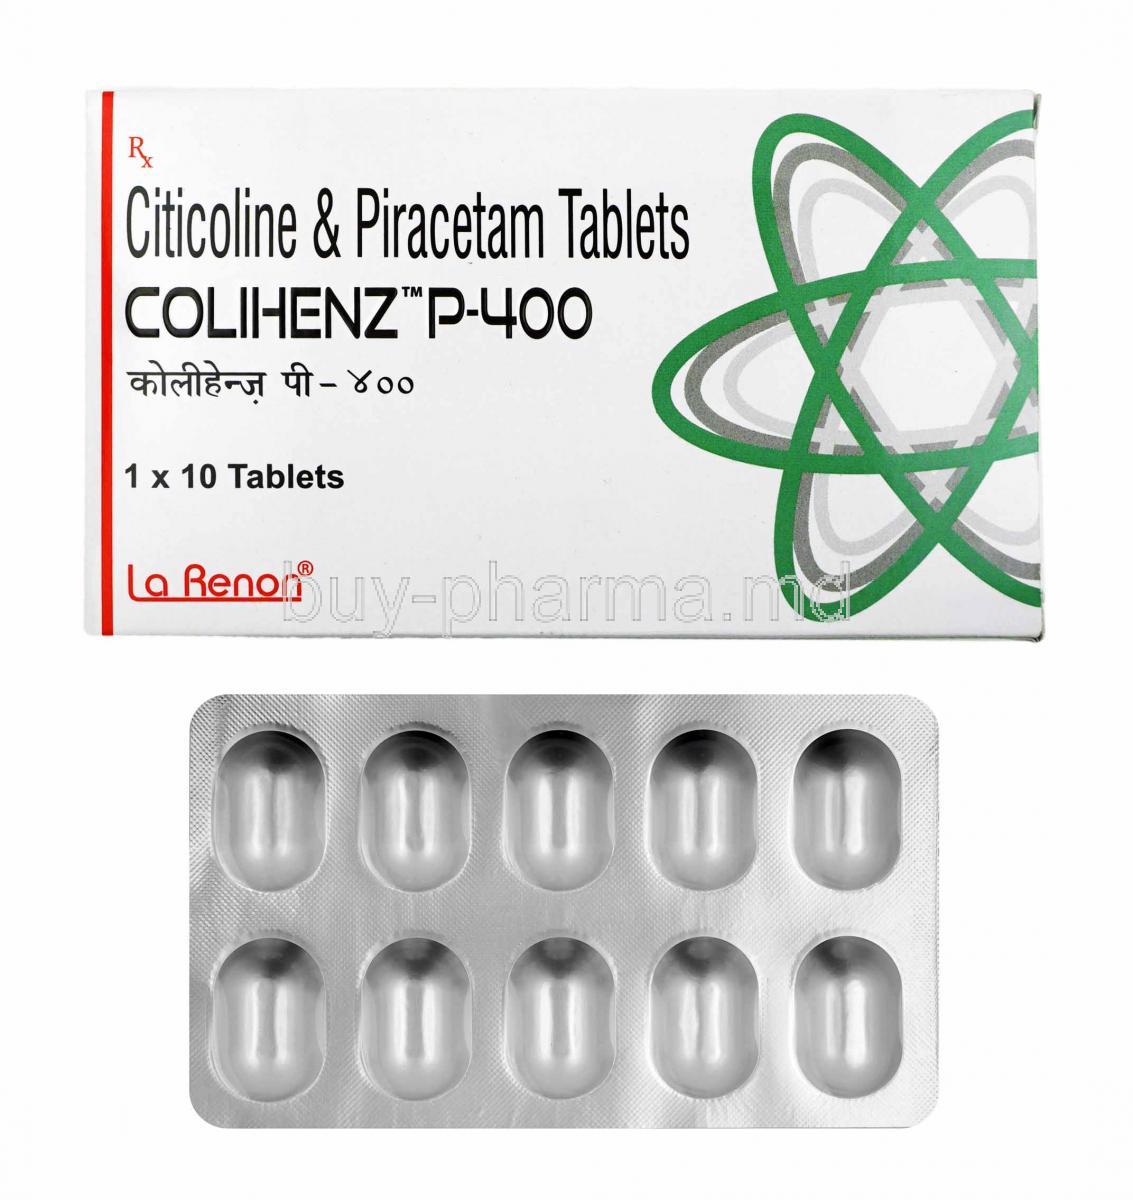 Colihenz P, Citicoline and Piracetam 400mg box and tablets